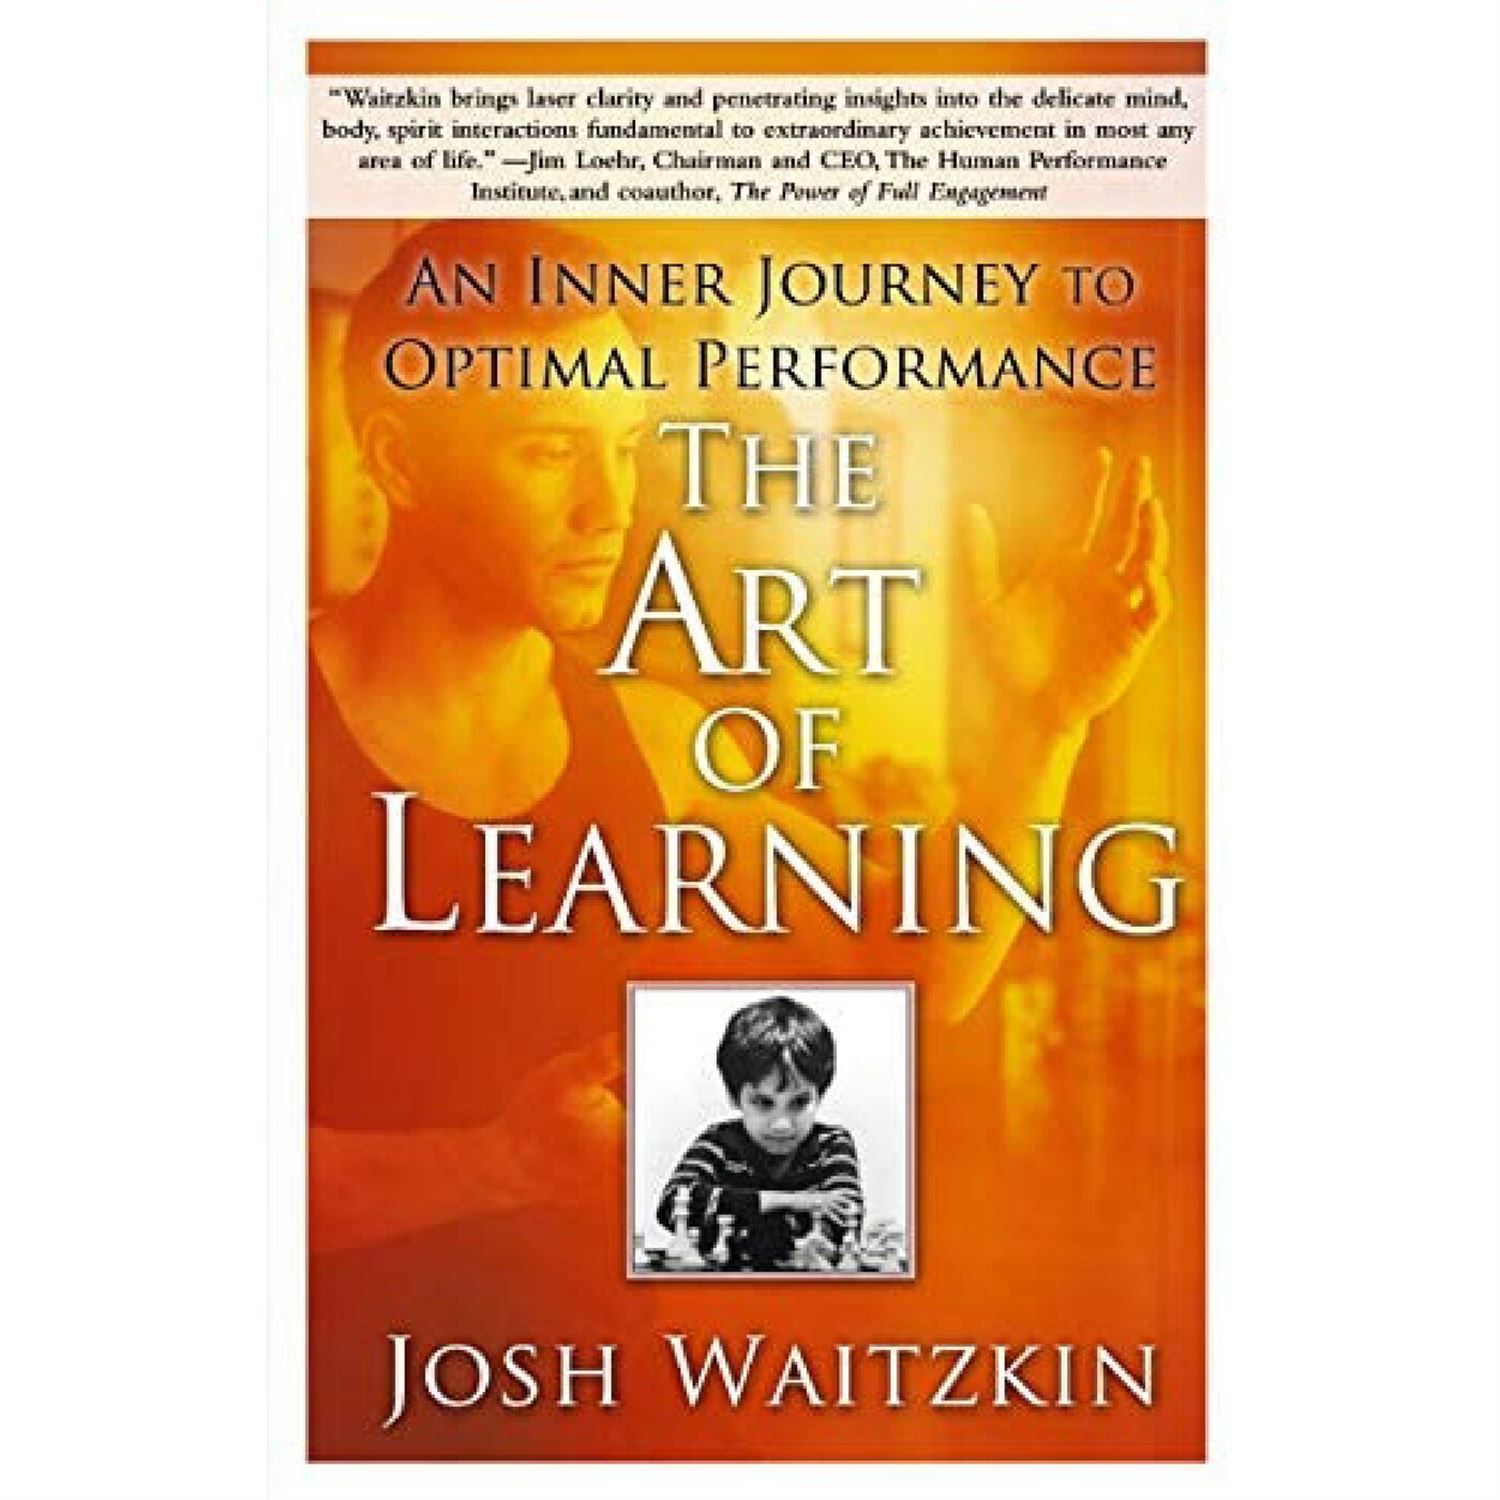 The Art Of Learning book